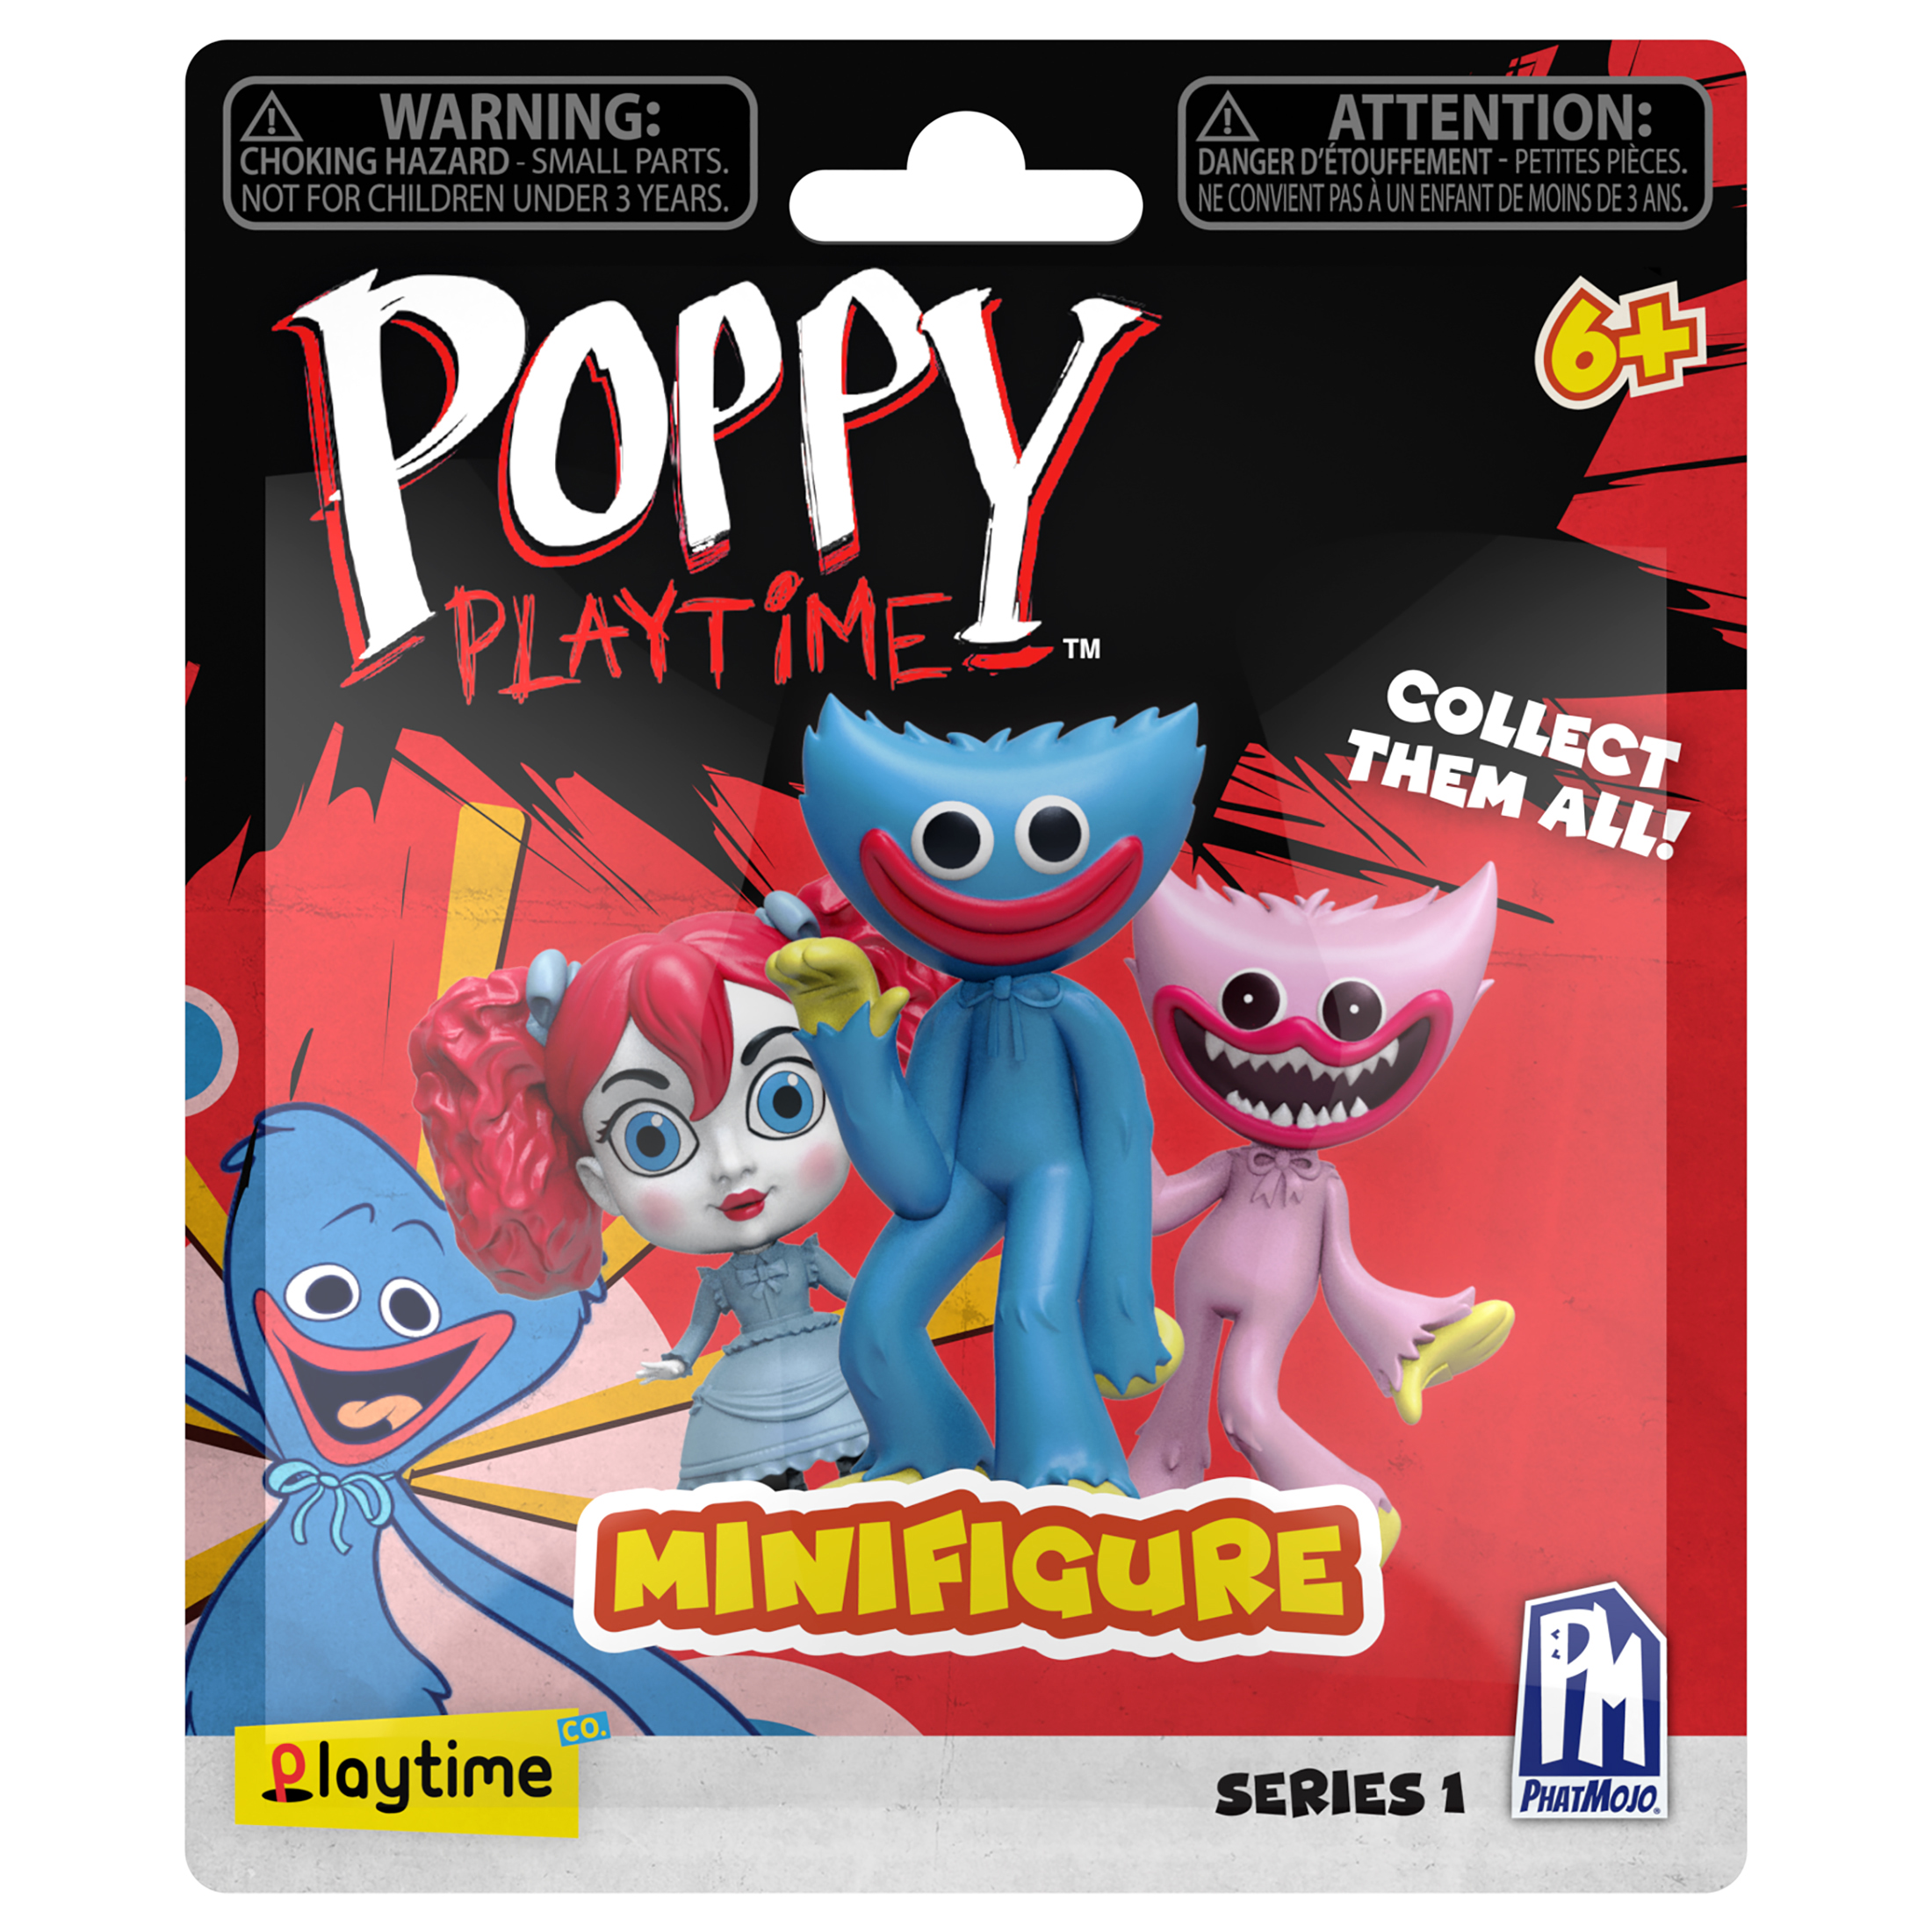 Poppy Playtime Minifigure Blind Bag, Series 1, Age 6 and up by